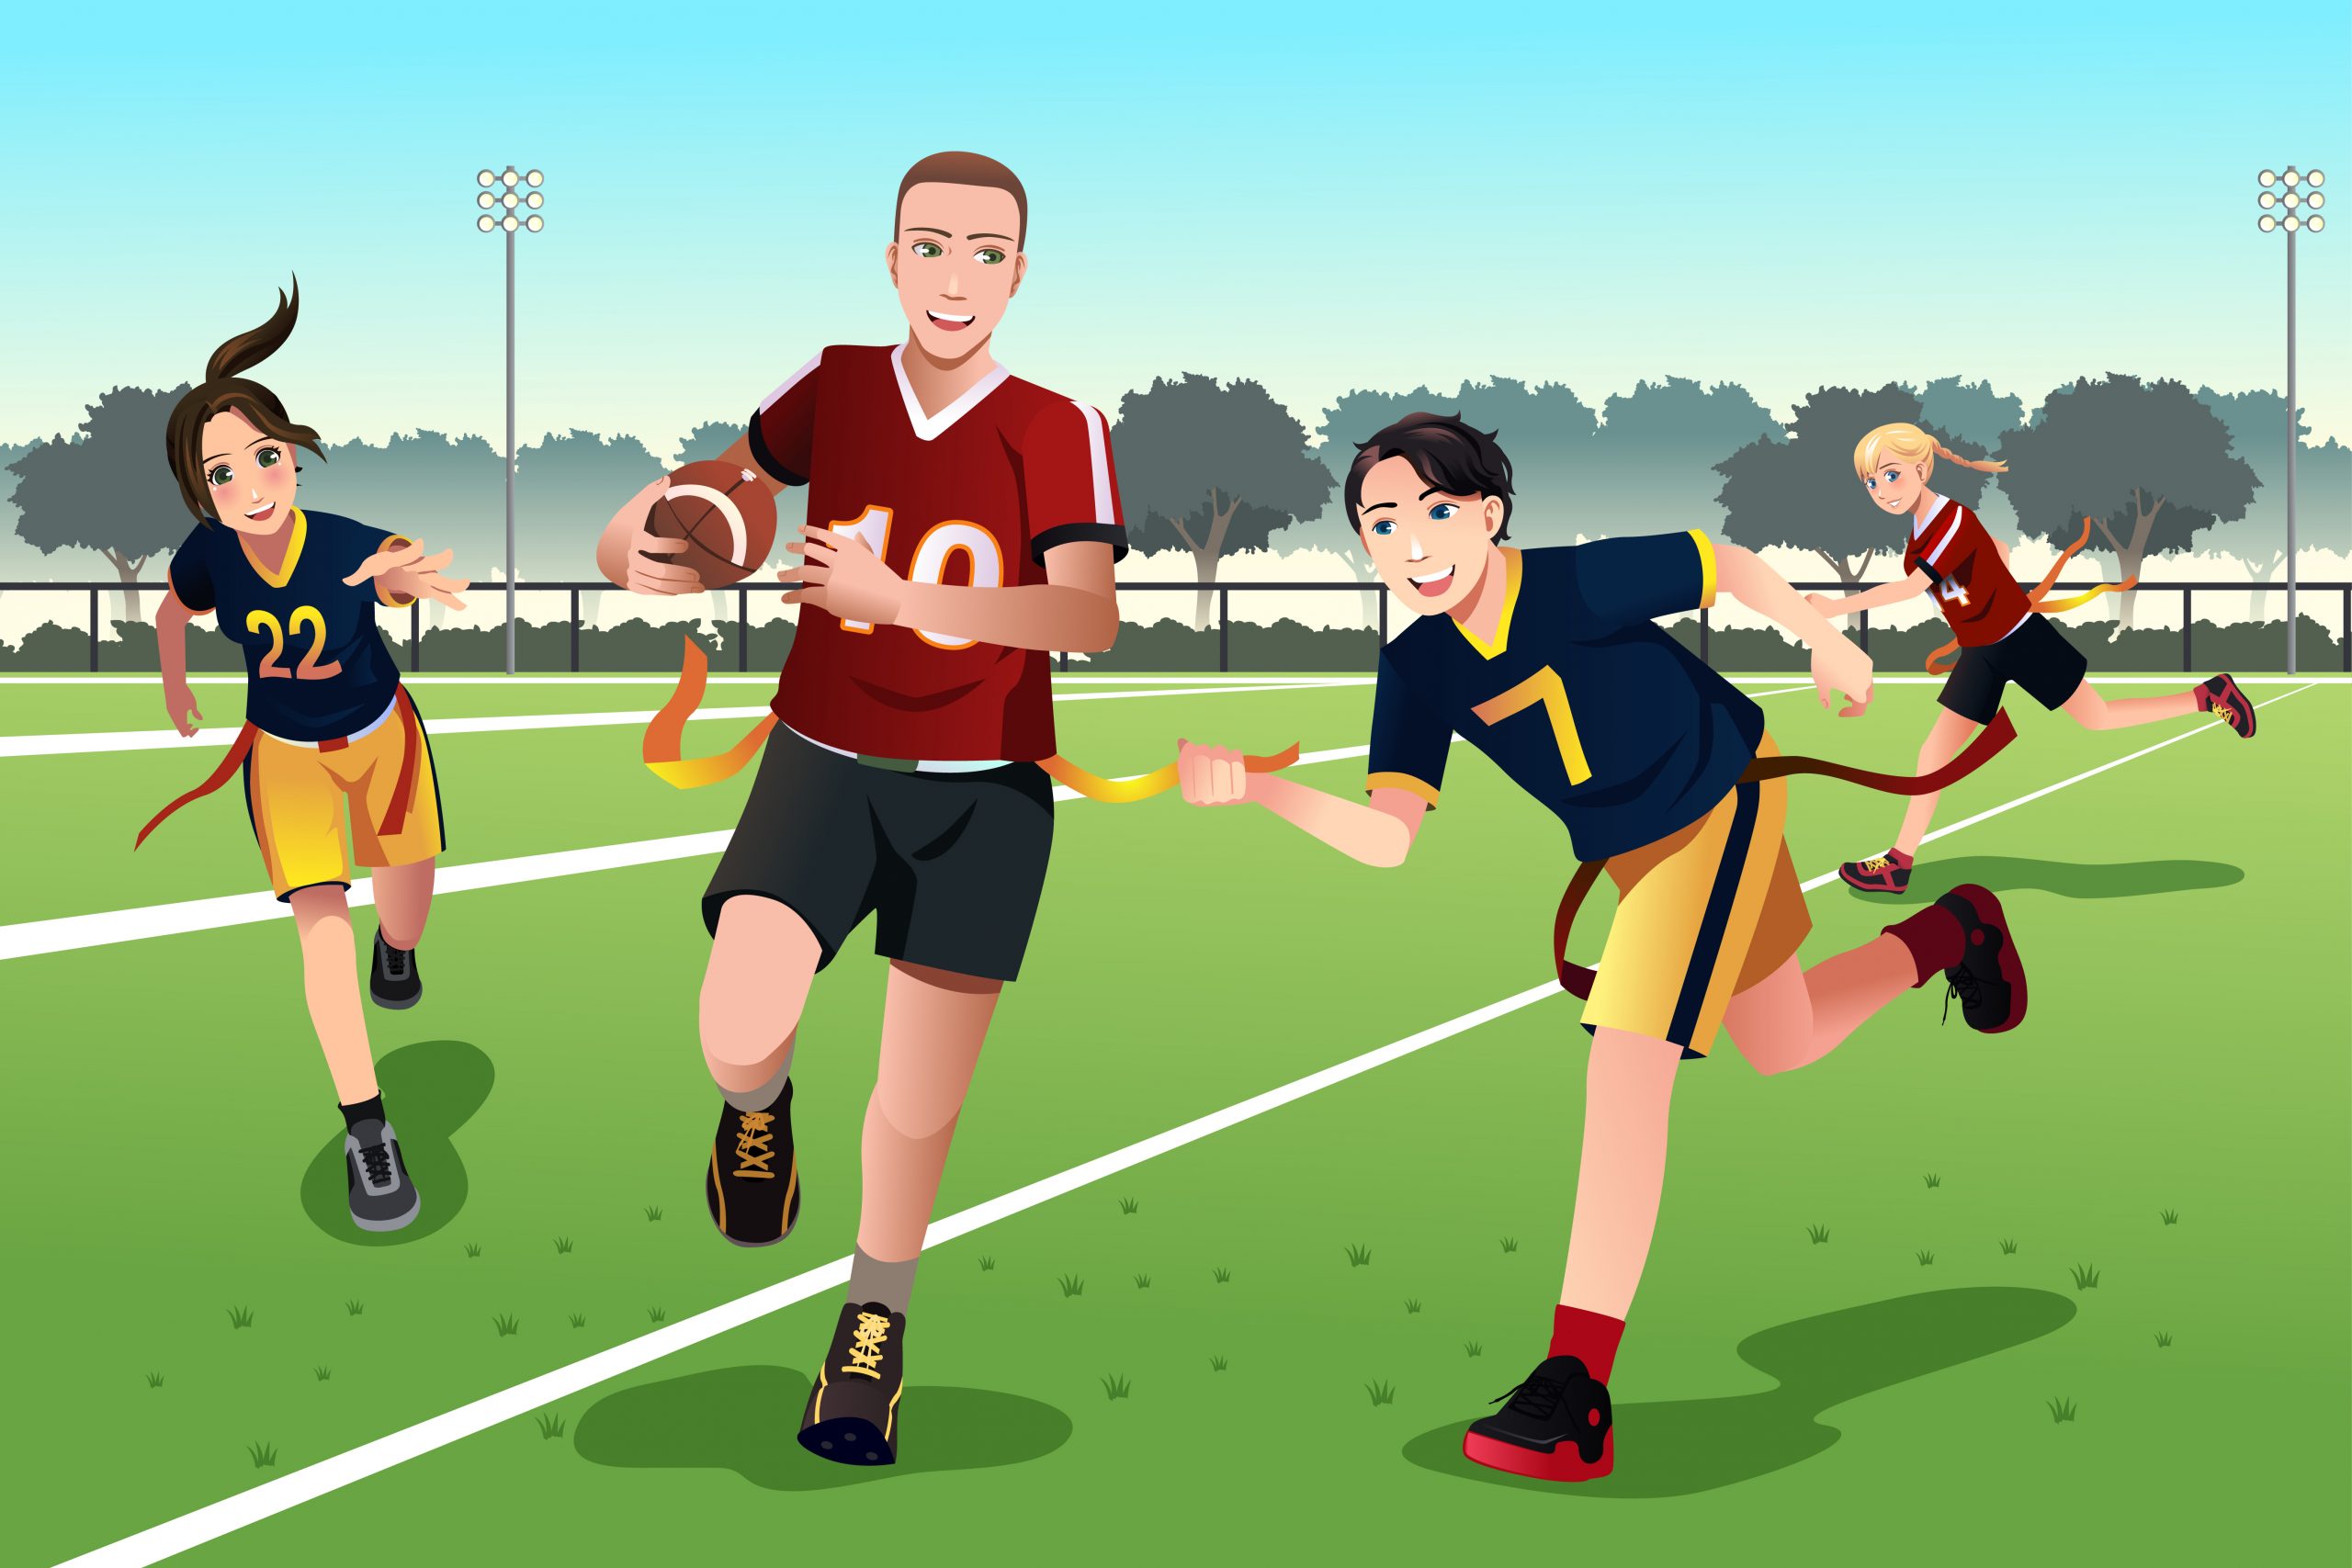 A vector illustration of young people playing flag football